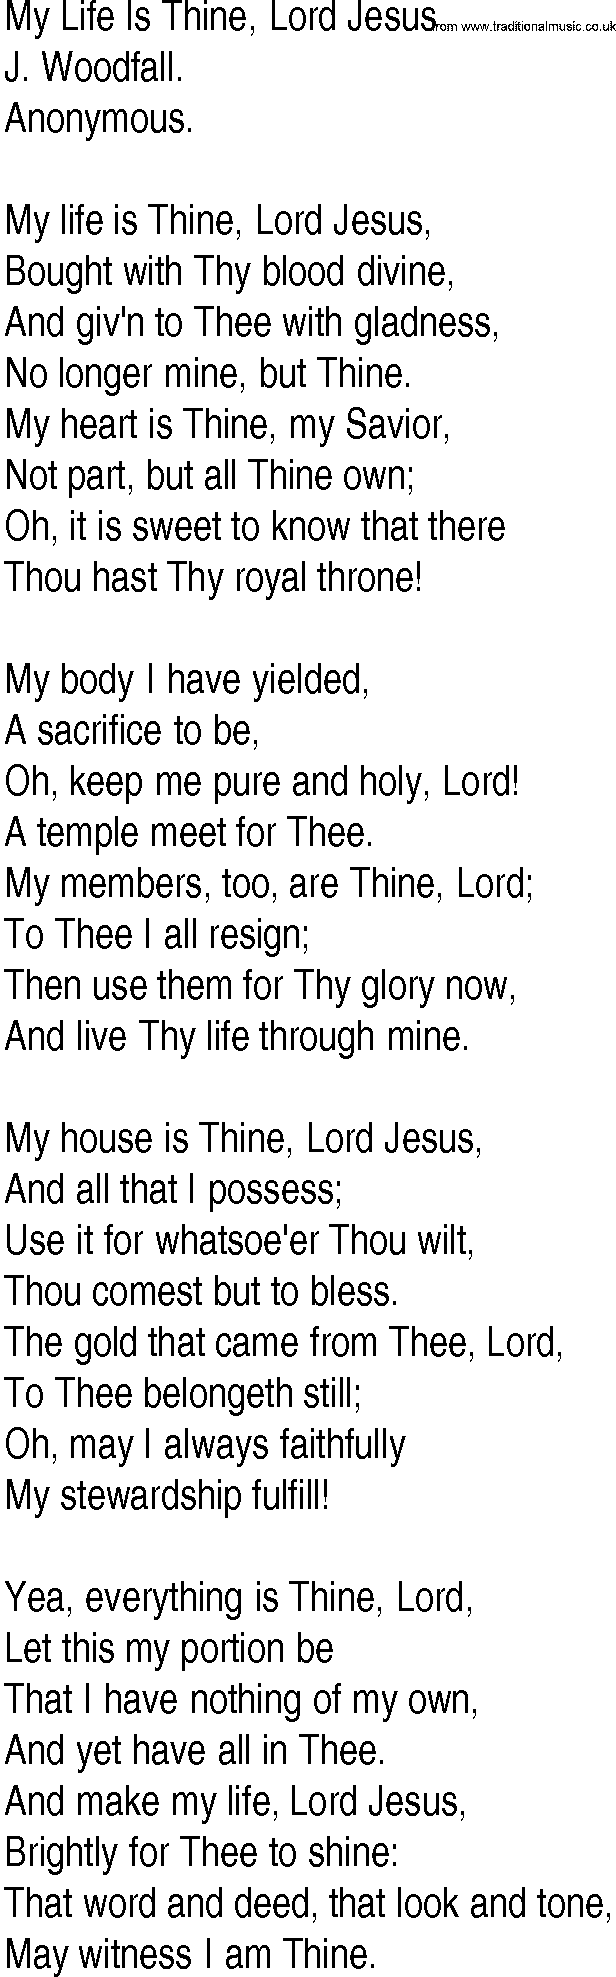 Hymn and Gospel Song: My Life Is Thine, Lord Jesus by J Woodfall lyrics